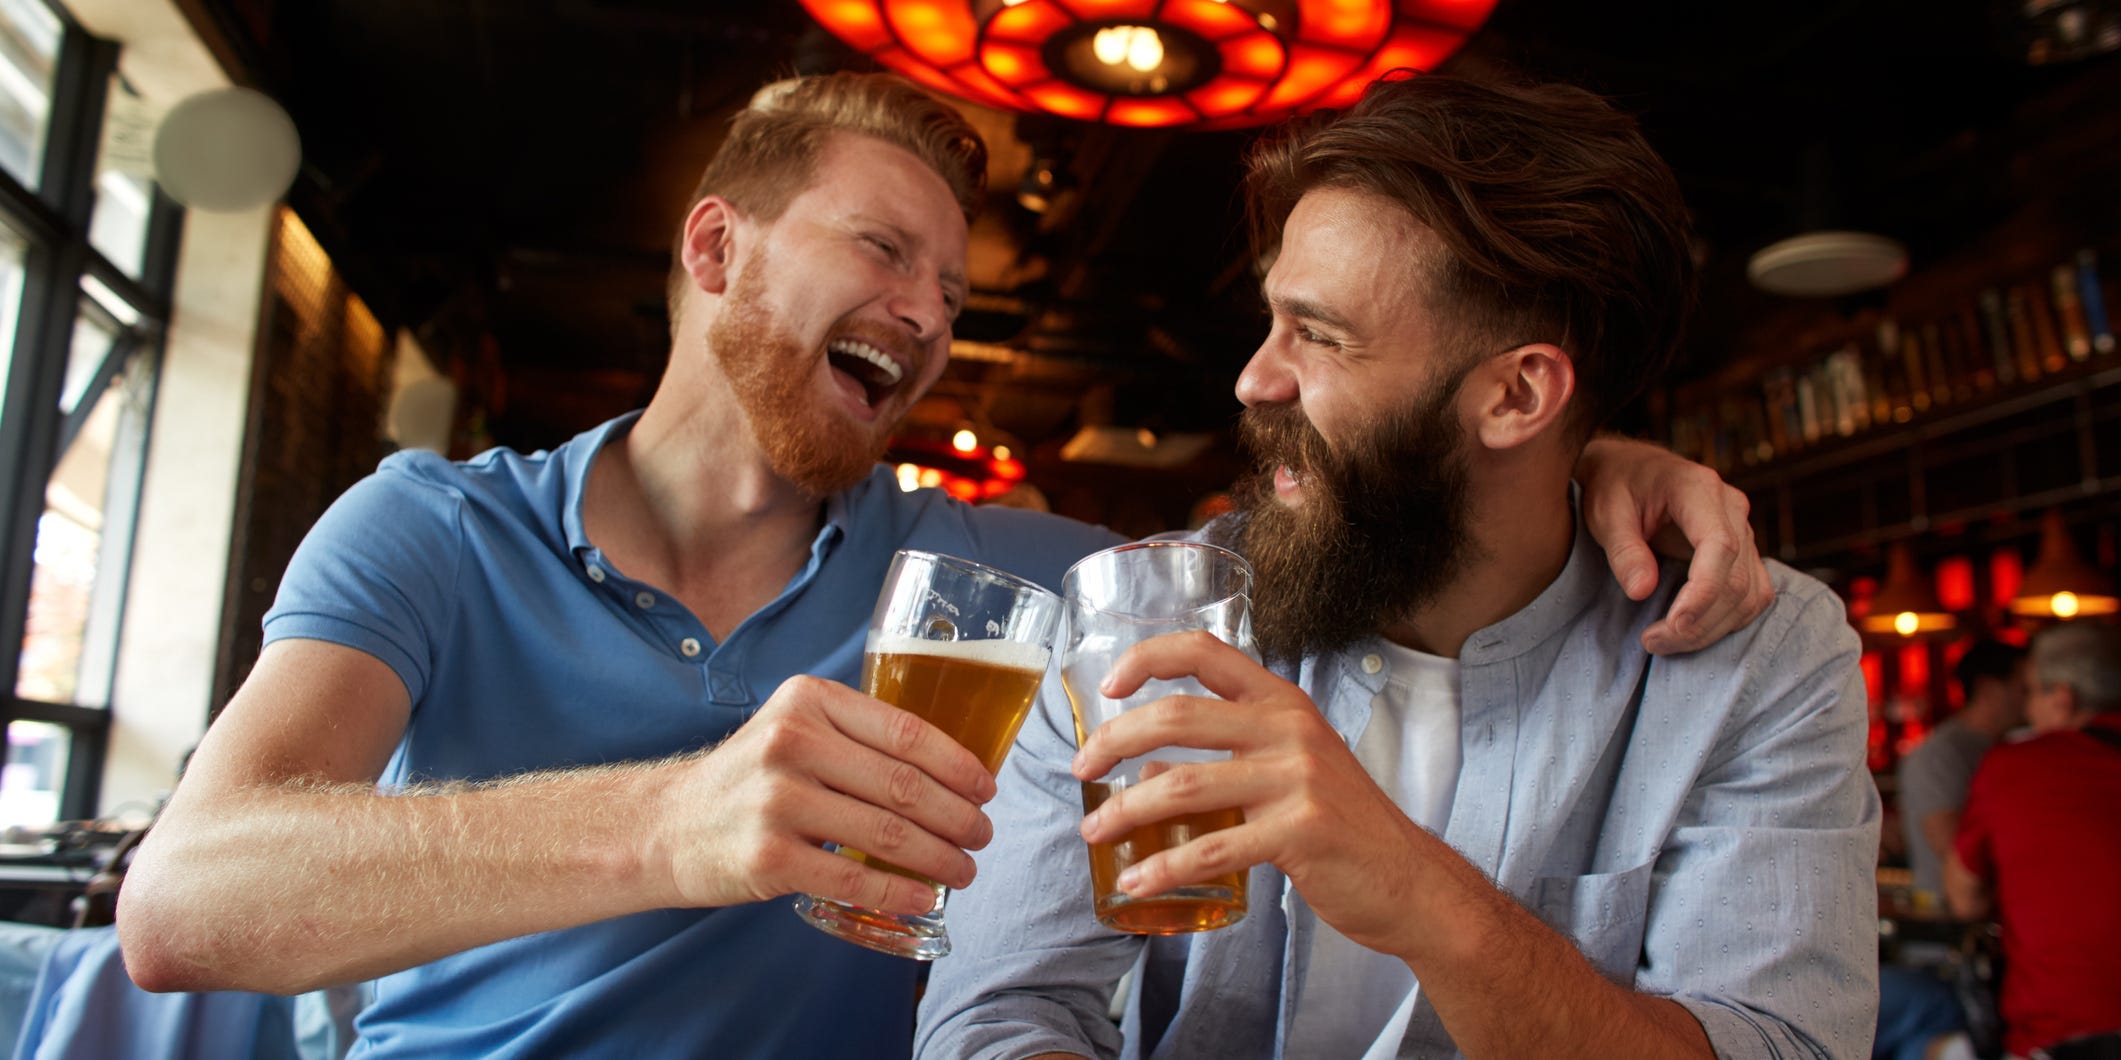 Two men sit close together at a brewery drinking beer and laughing together.